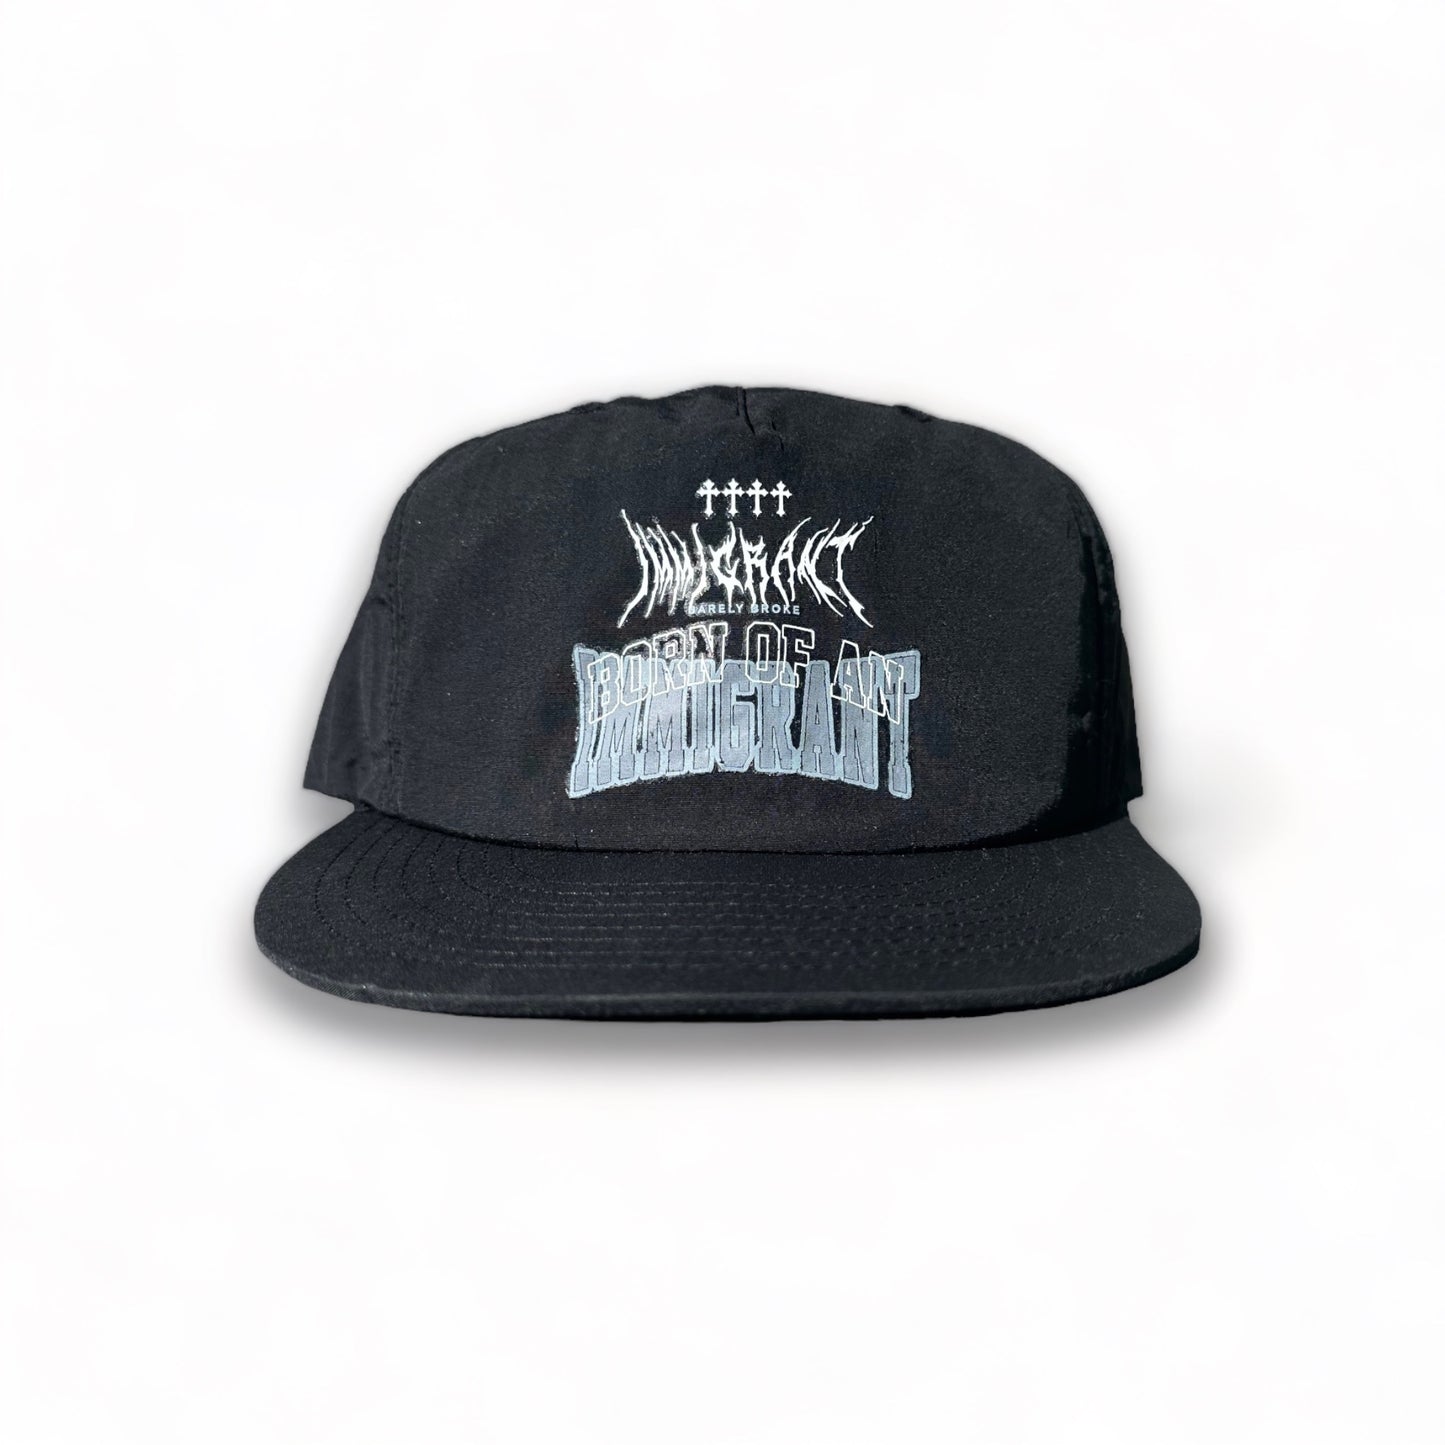 BORN OF AN IMMIGRANT LAST CHAPTER SURF CAP - BLACK